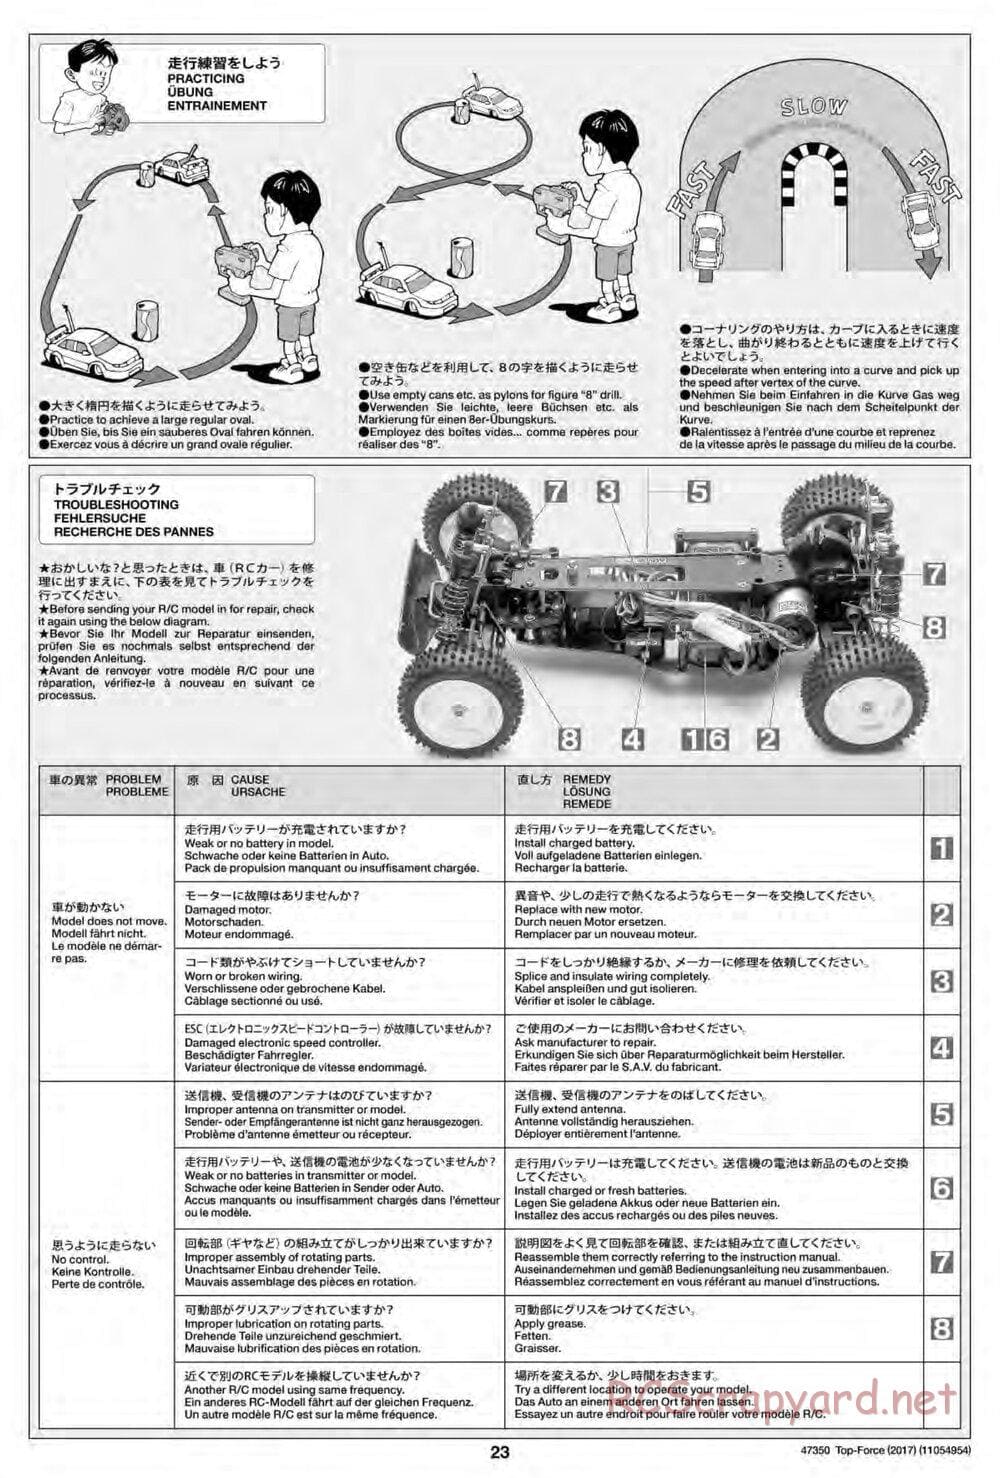 Tamiya - Top Force 2017 - DF-01 Chassis - Manual - Page 23